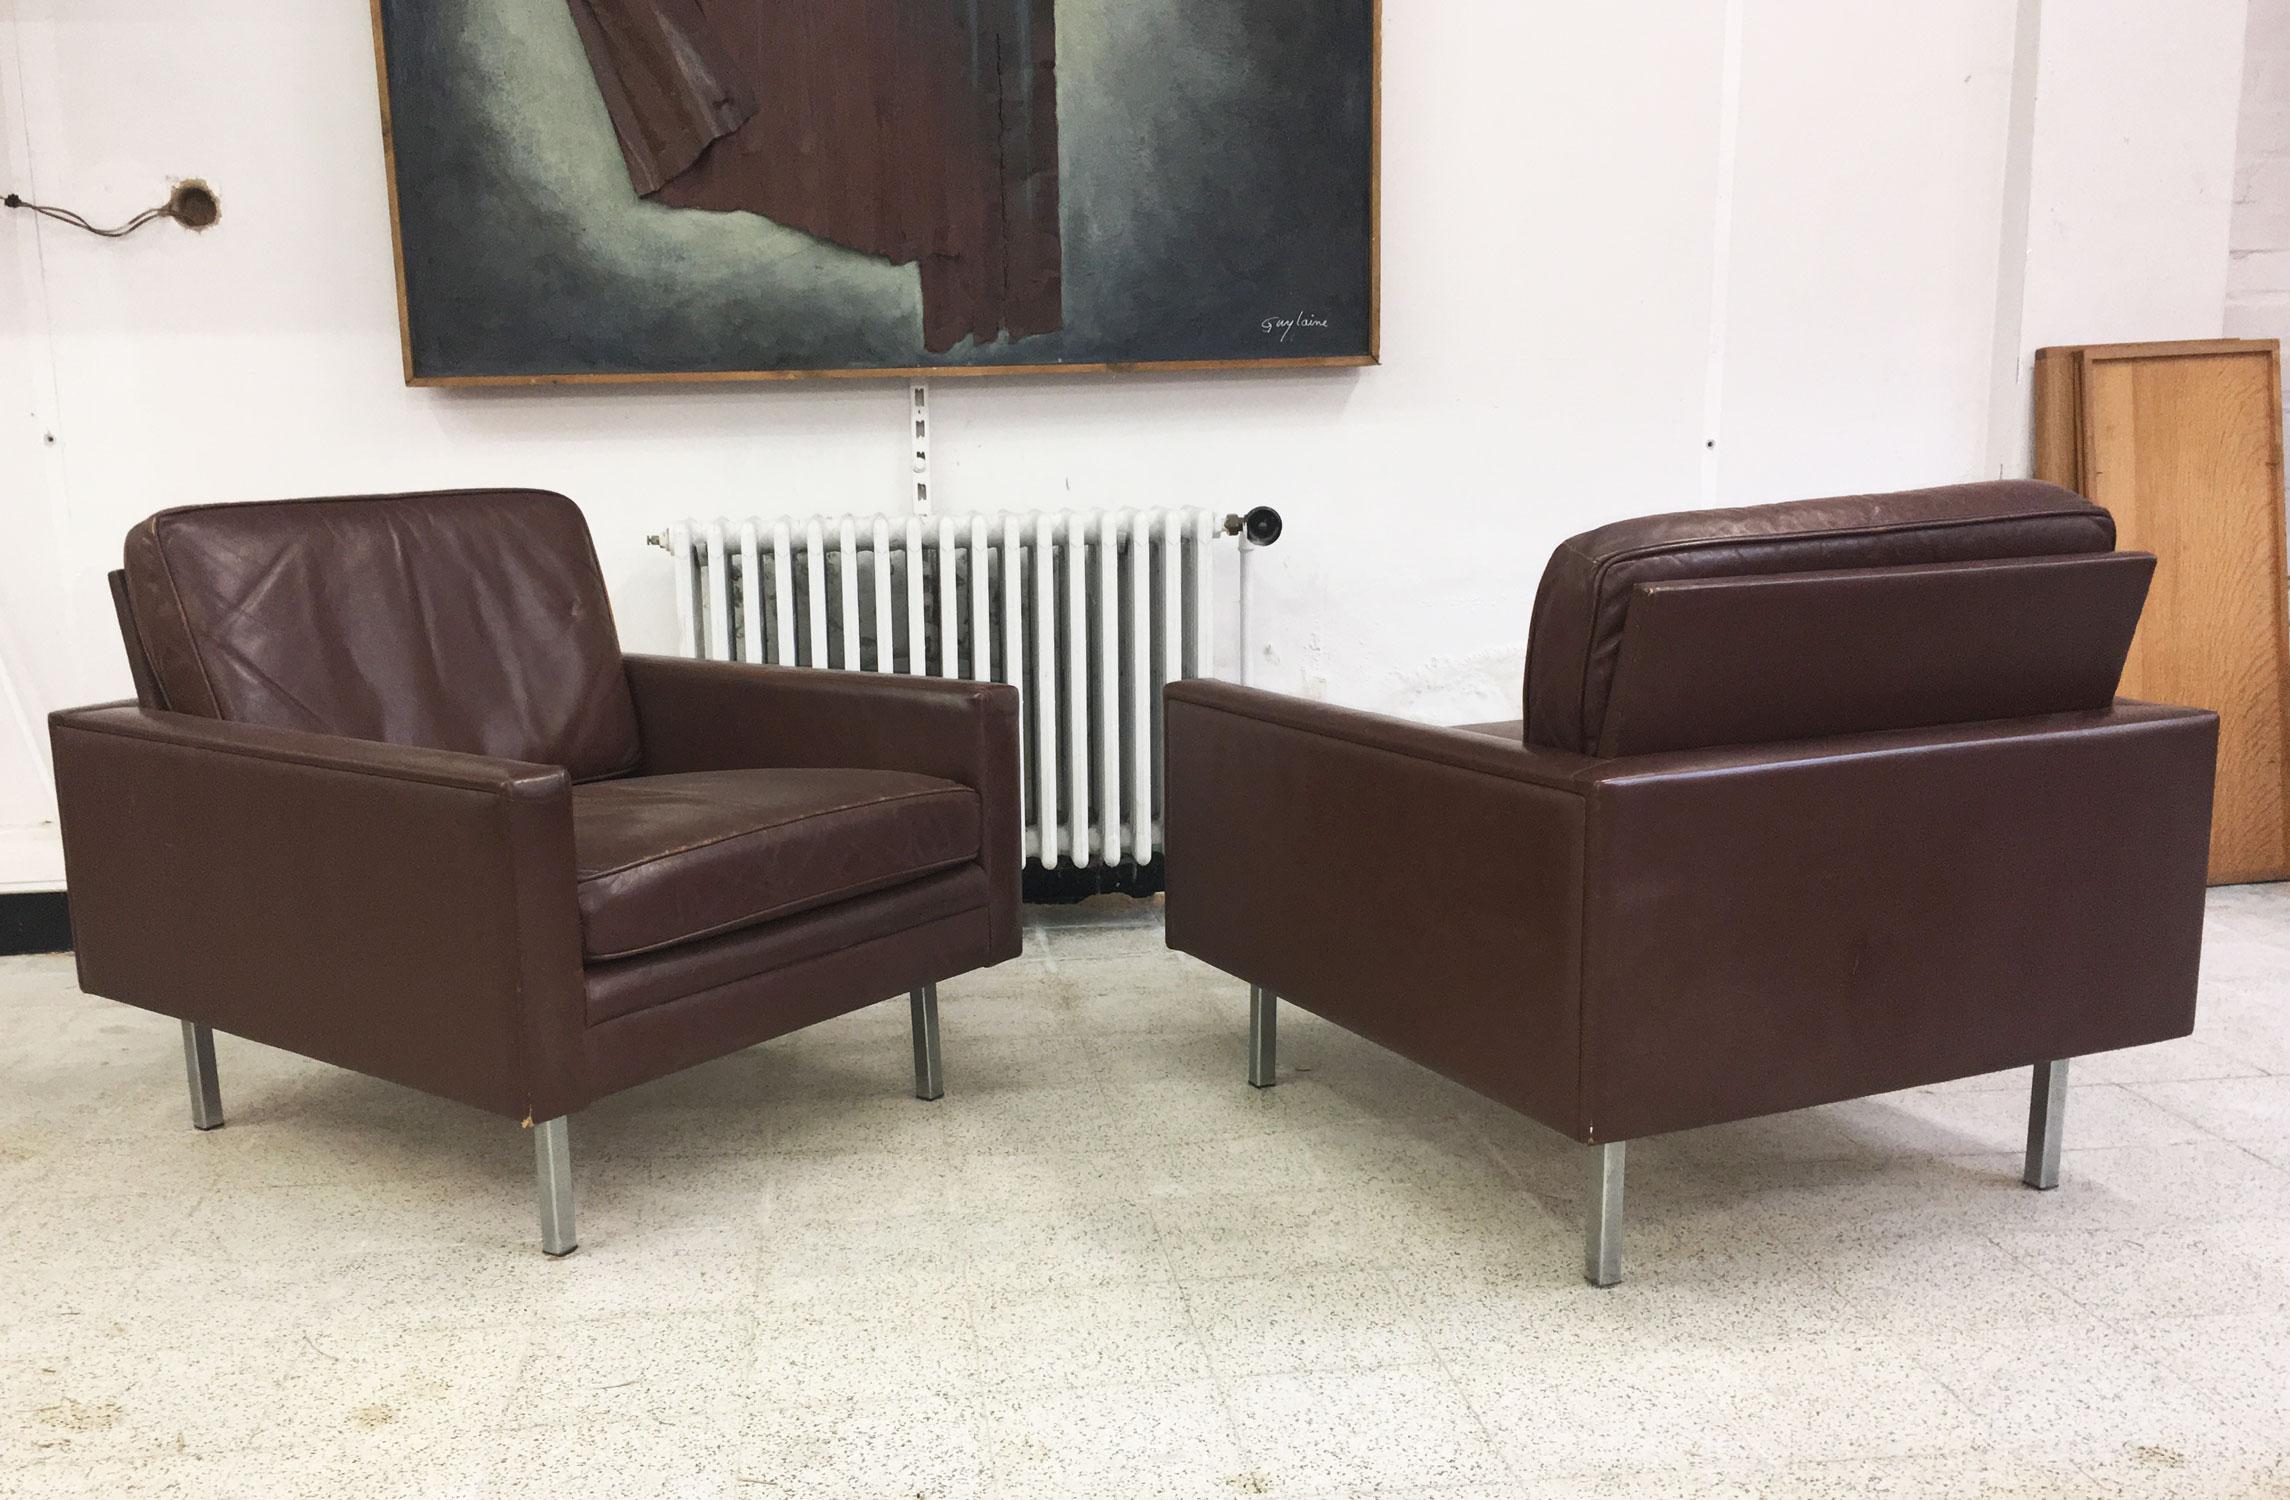 Mid-20th Century Pair of Leather Armchairs in the Style of Florence Knoll, circa 1950-1960 For Sale